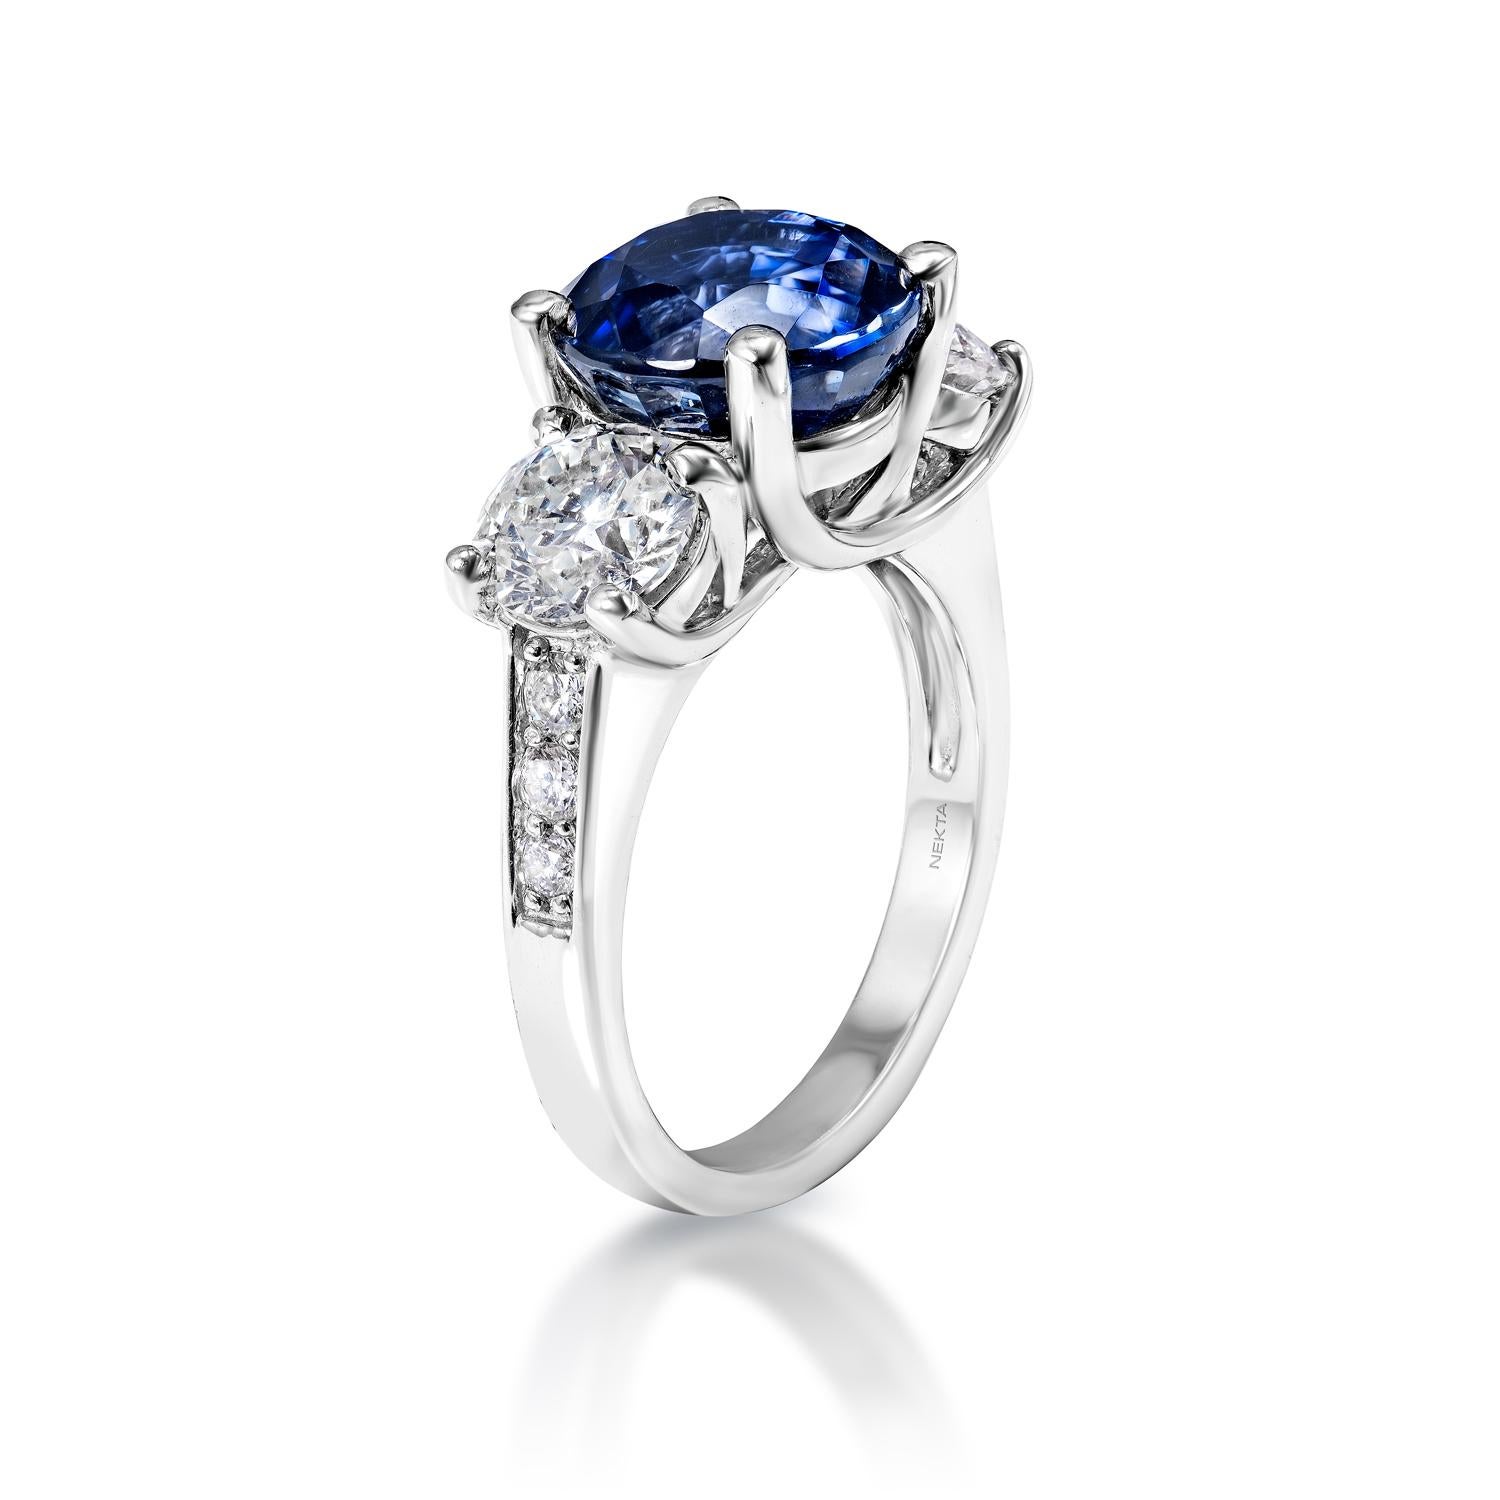 Round Cut 8 Carat Round Brilliant Blue Sapphire Ring Certified For Sale